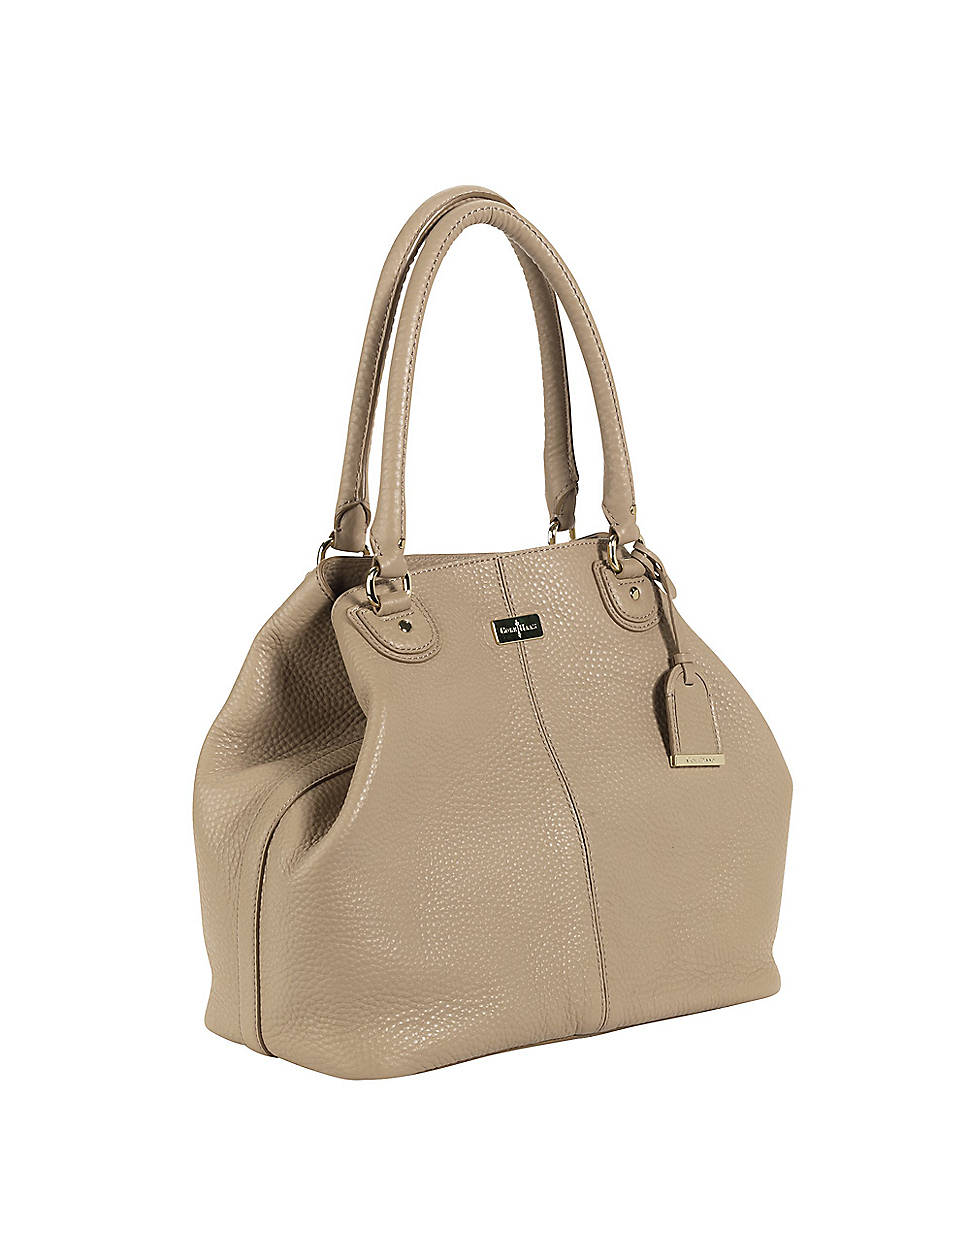 Cole Haan Village Leather Convertible Tote Bag in Beige | Lyst